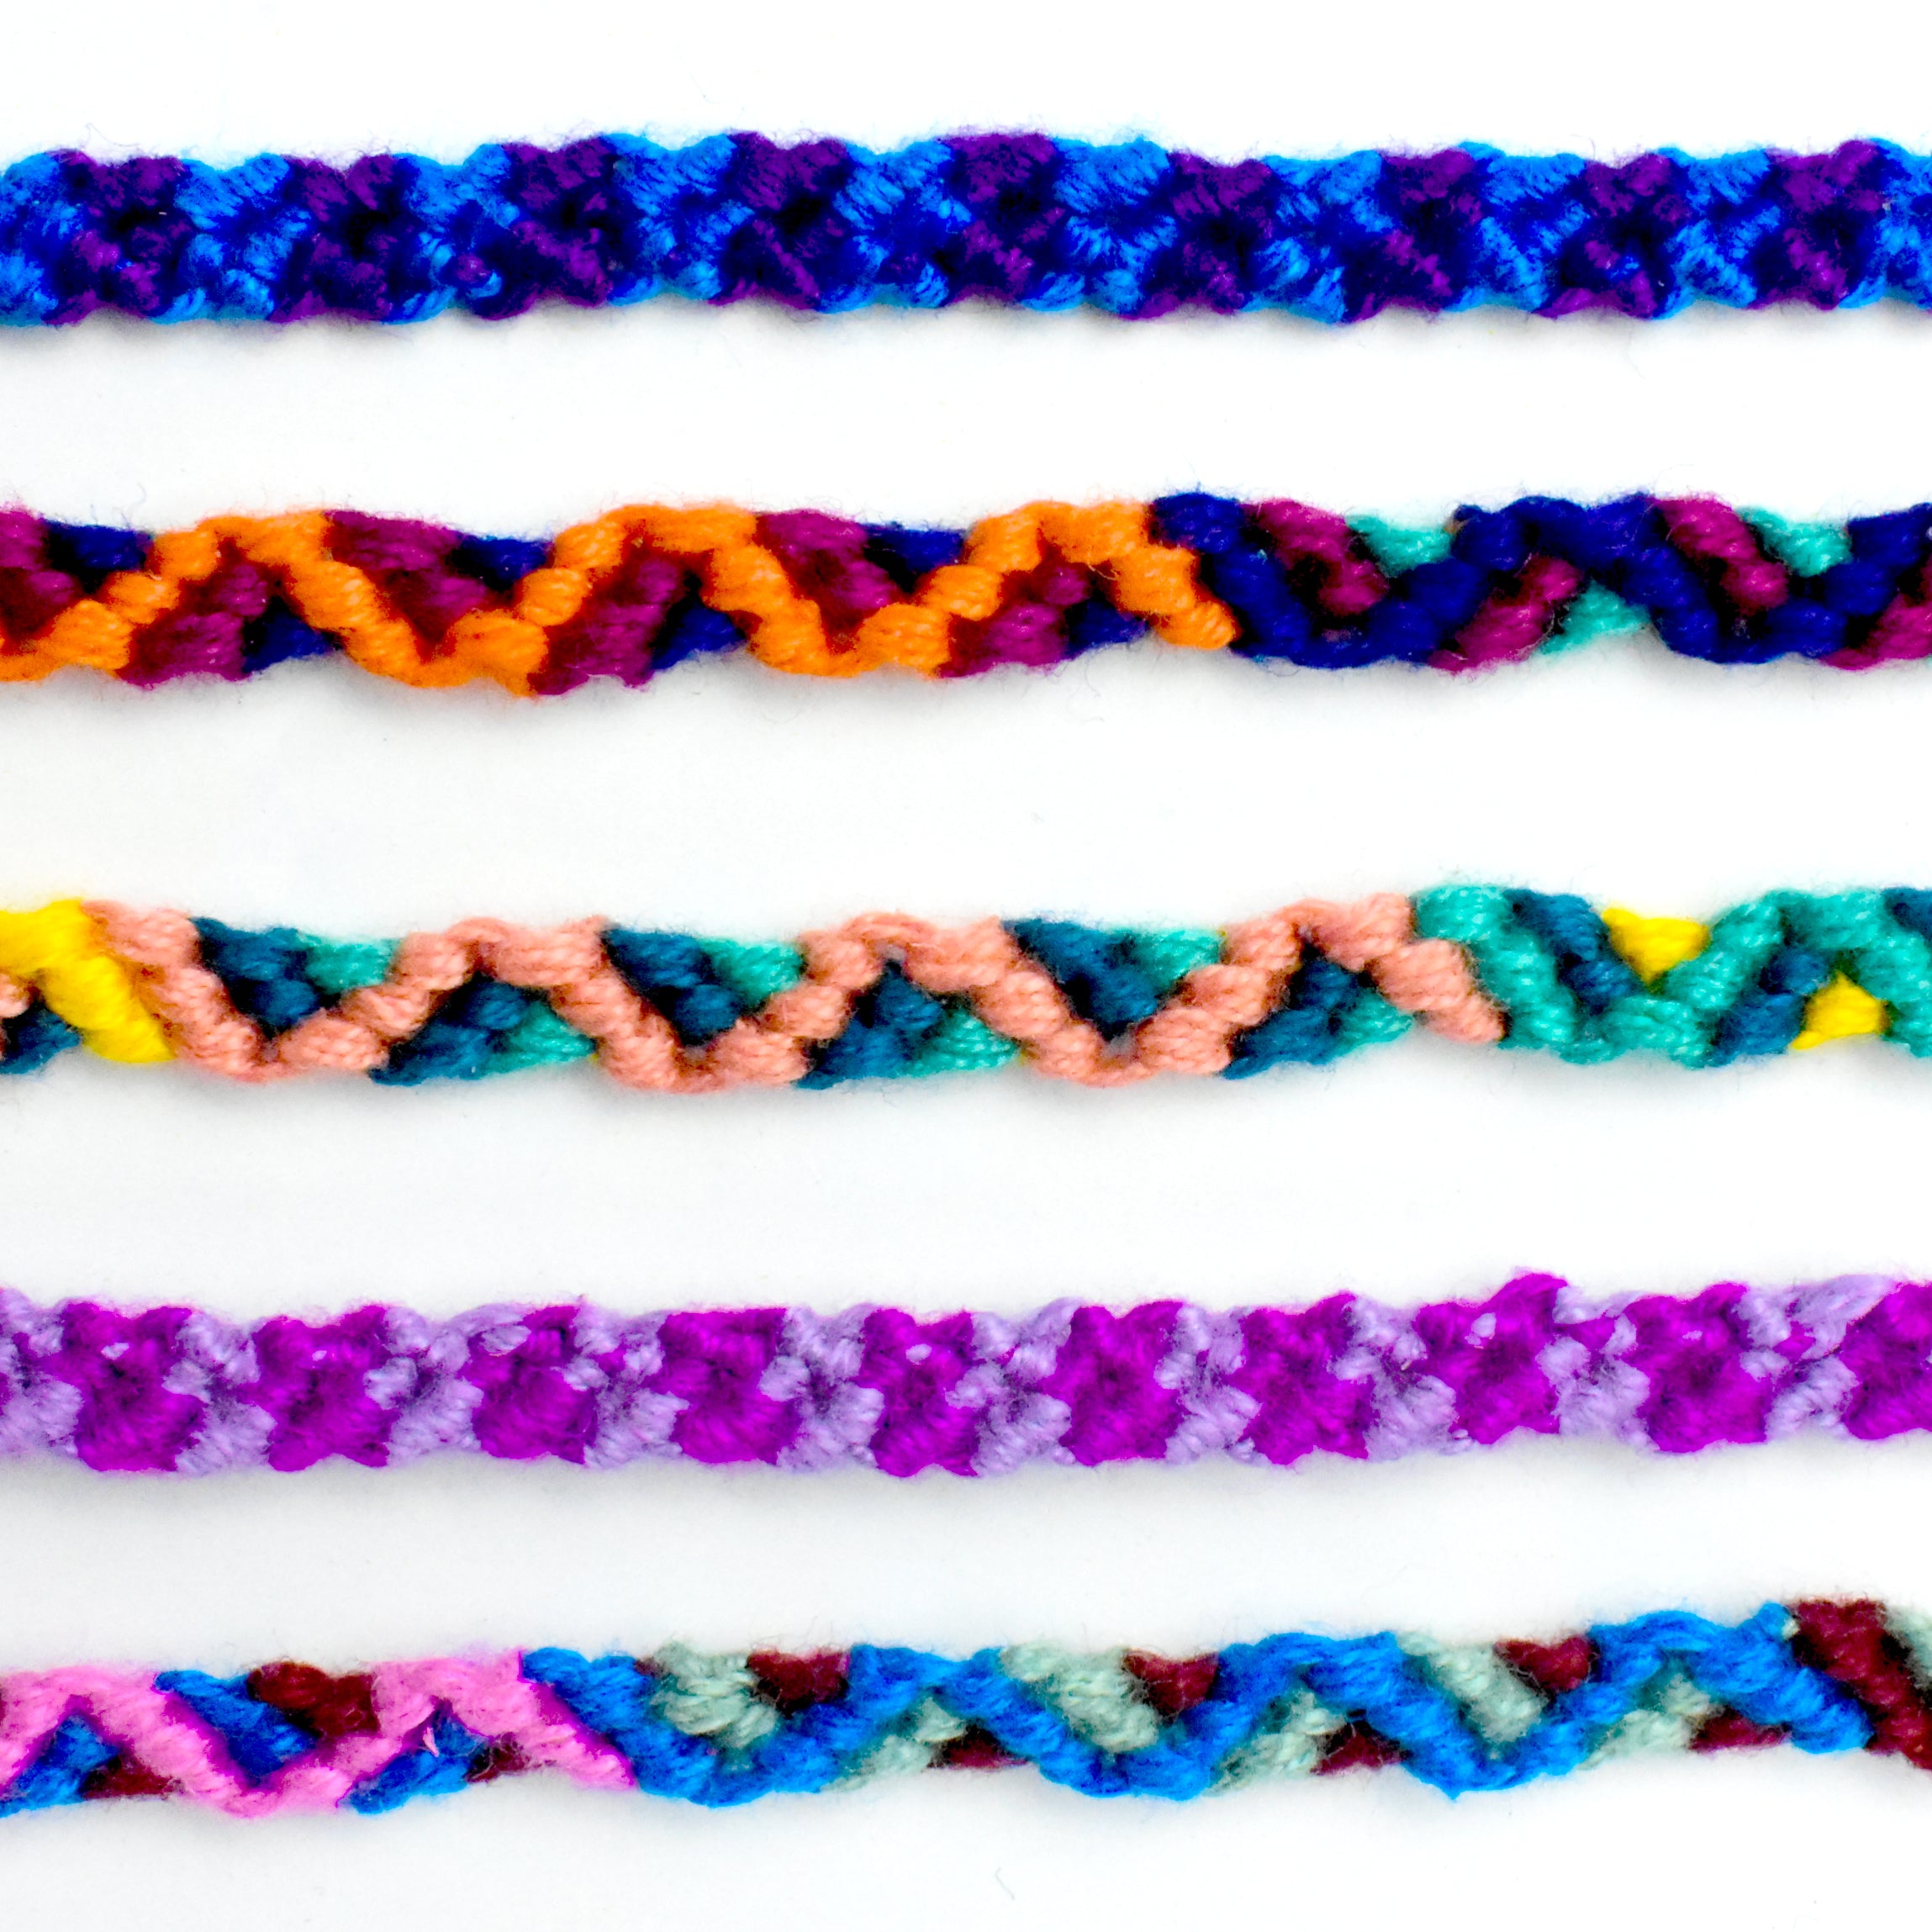 How to Make a Friendship Bracelet the Easy Way - Little Passports